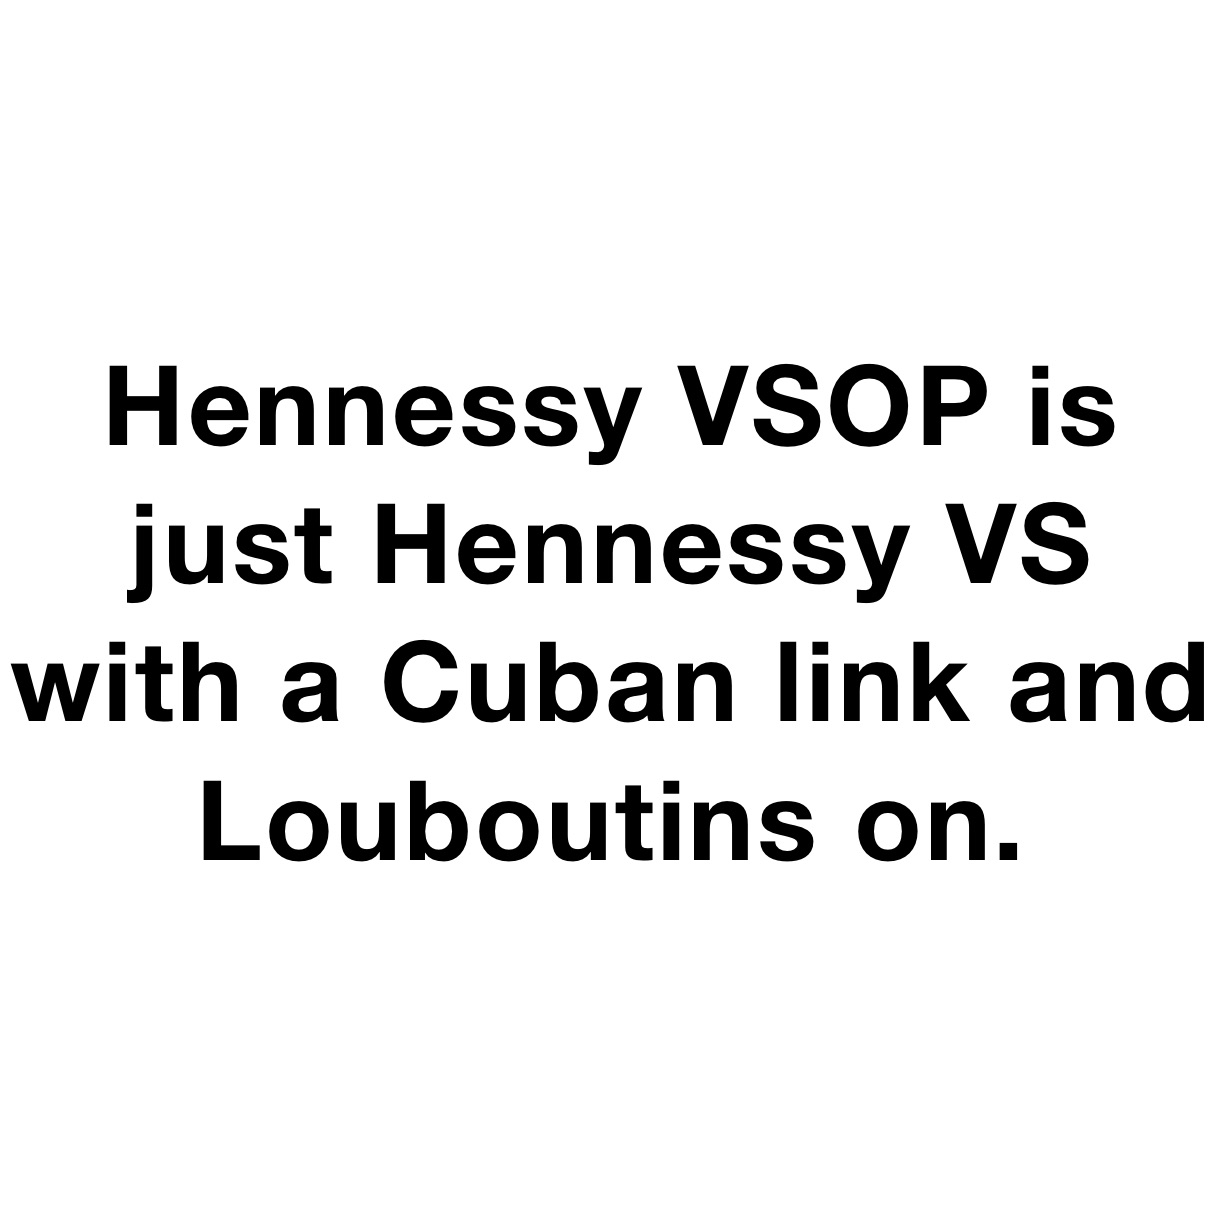 Hennessy VSOP is just Hennessy VS with a Cuban link and Louboutins on. 